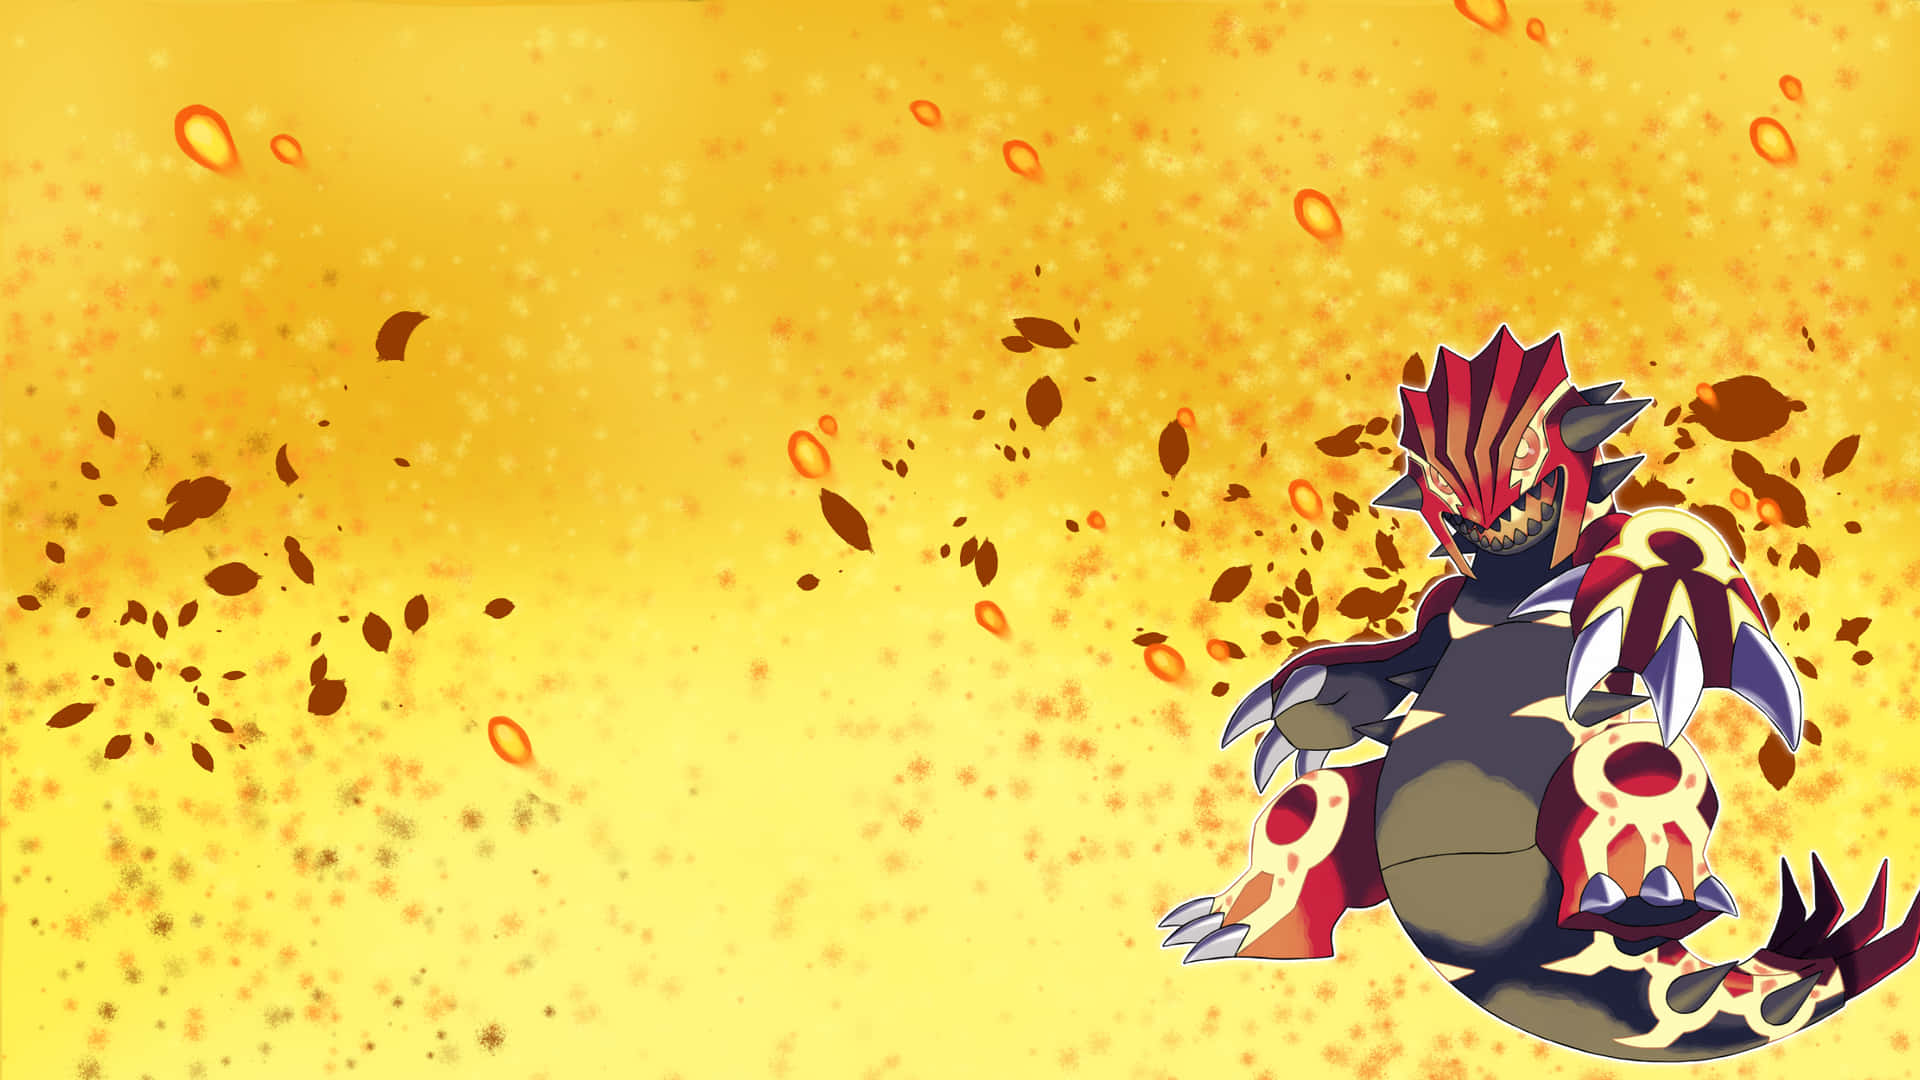 Primal Groudon Against Yellow Abstract Background Picture